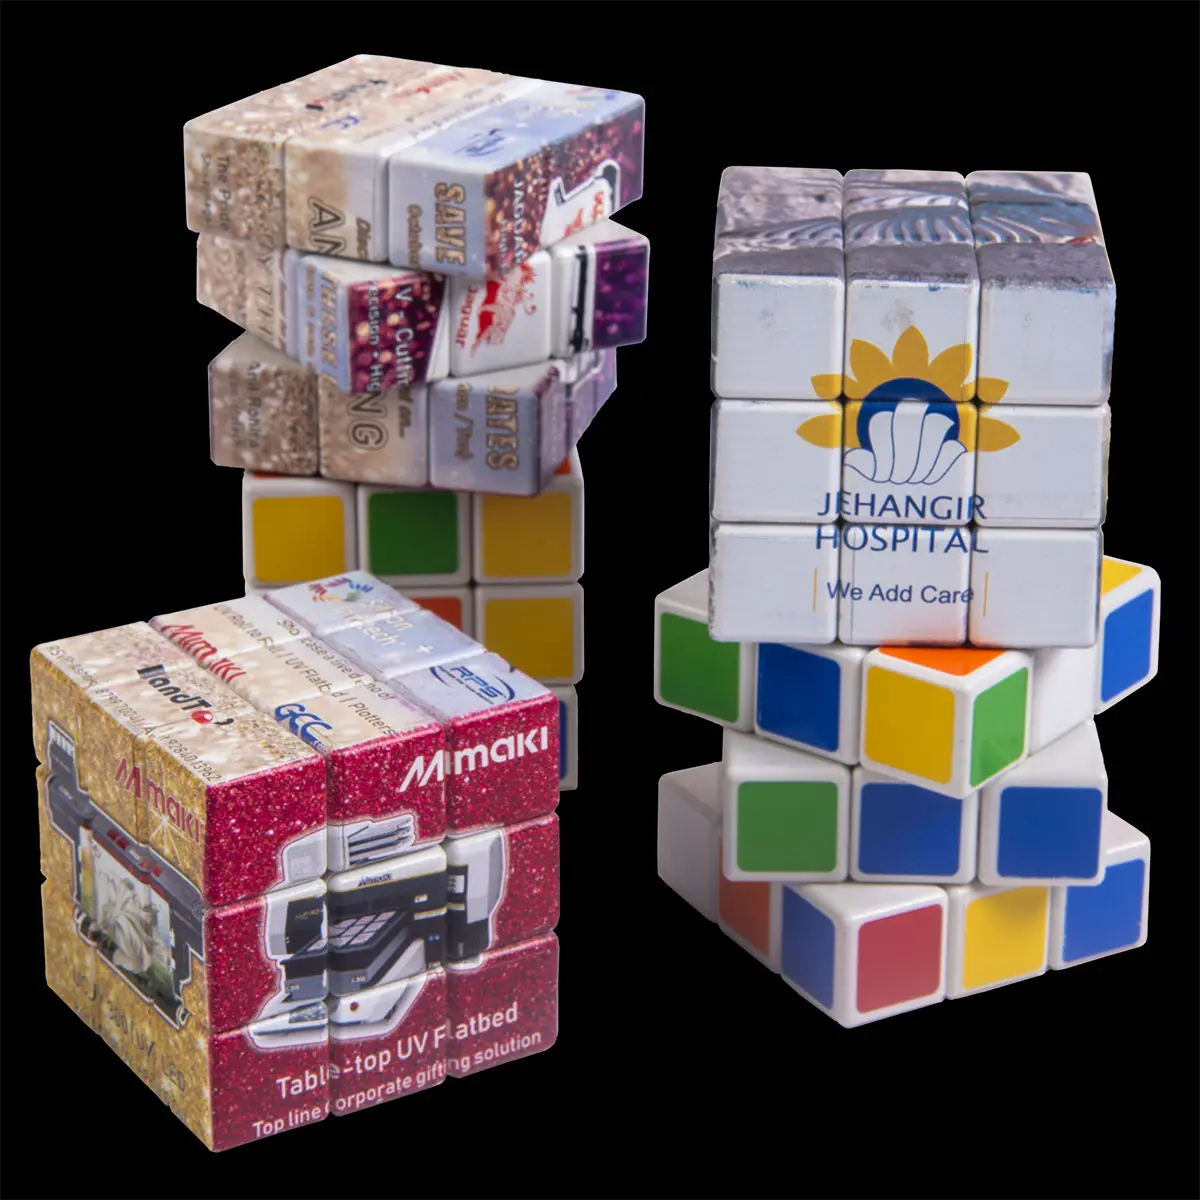 personalized rubik’s cube UV printed with photos and images is a fabulous corporate gifting idea